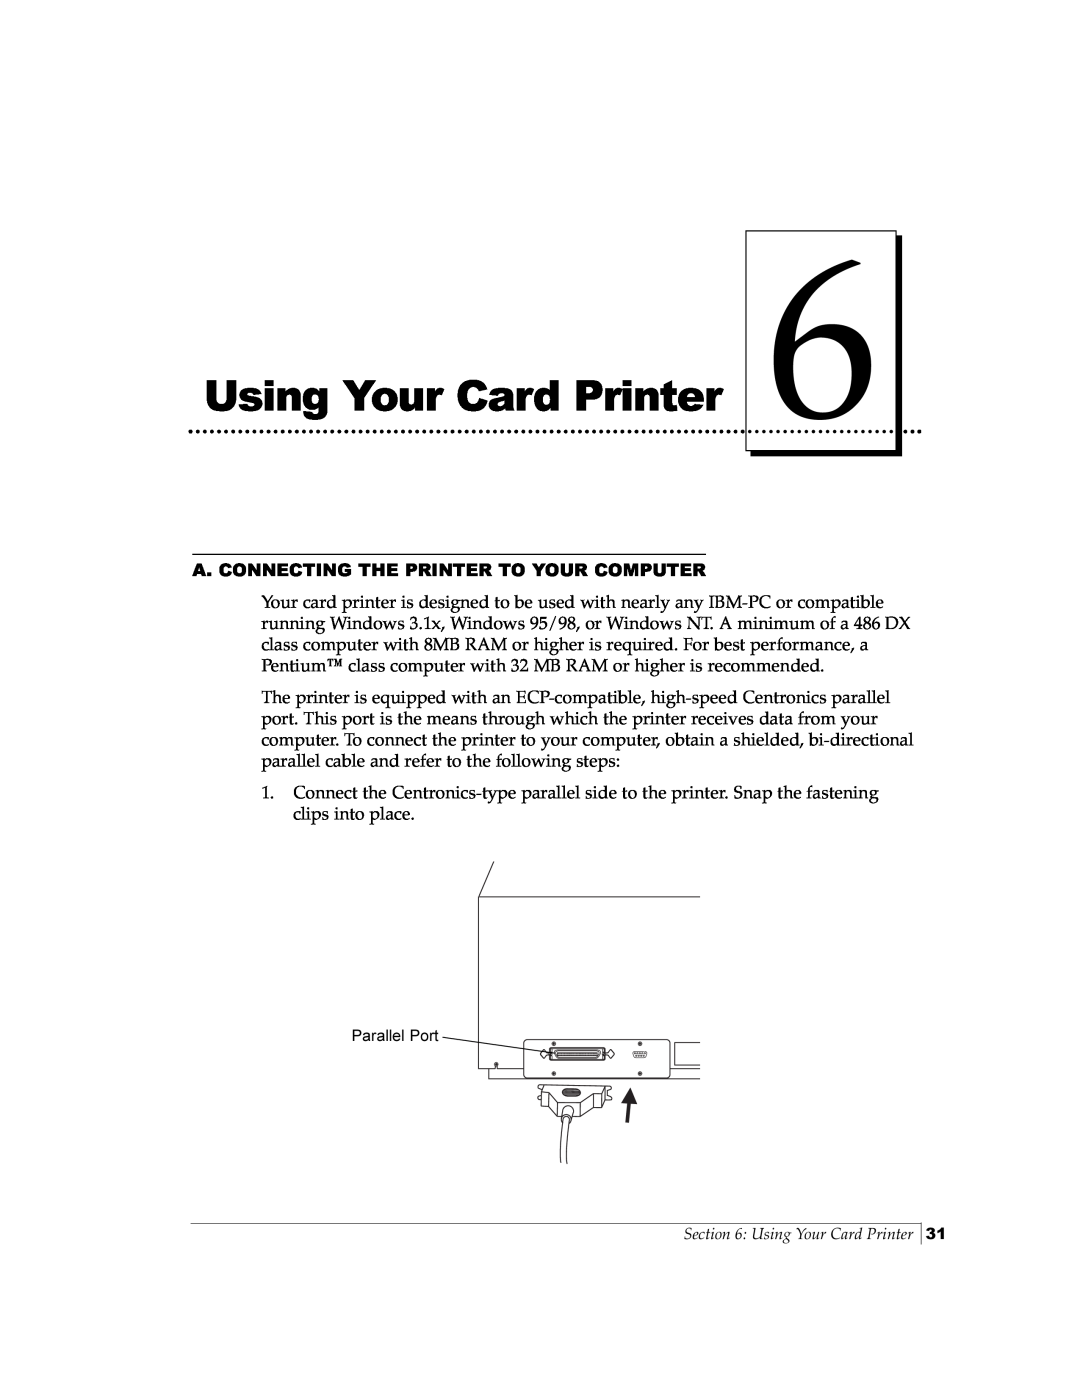 FARGO electronic Pro-L manual Using Your Card Printer, A. Connecting The Printer To Your Computer 